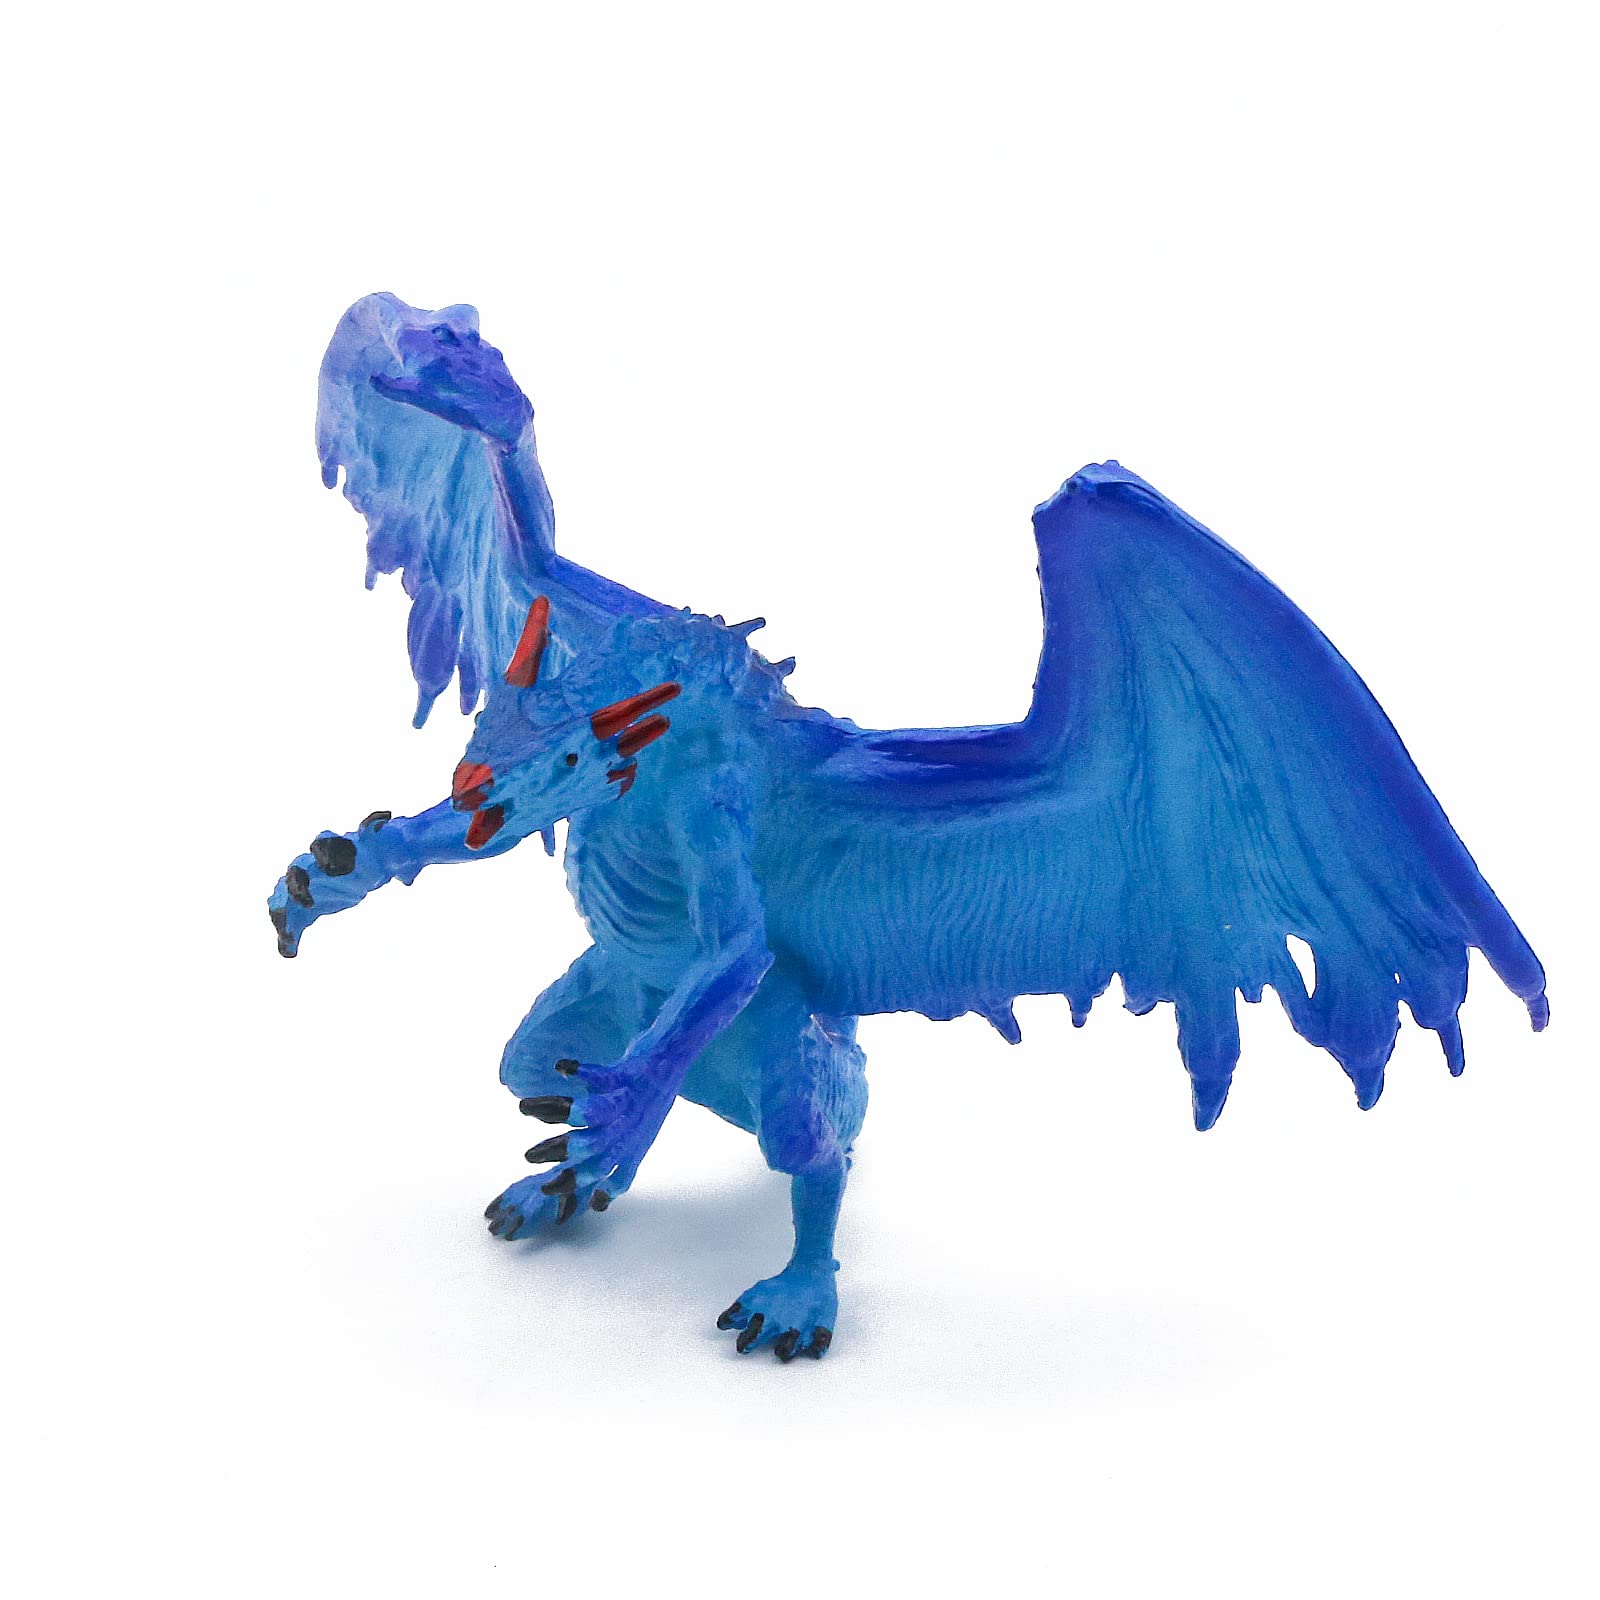 SIENON 5" & 3" Dragon Toy Figures - 10 Pack Assorted Mythical Figurines for Cake Toppers & Party Favors